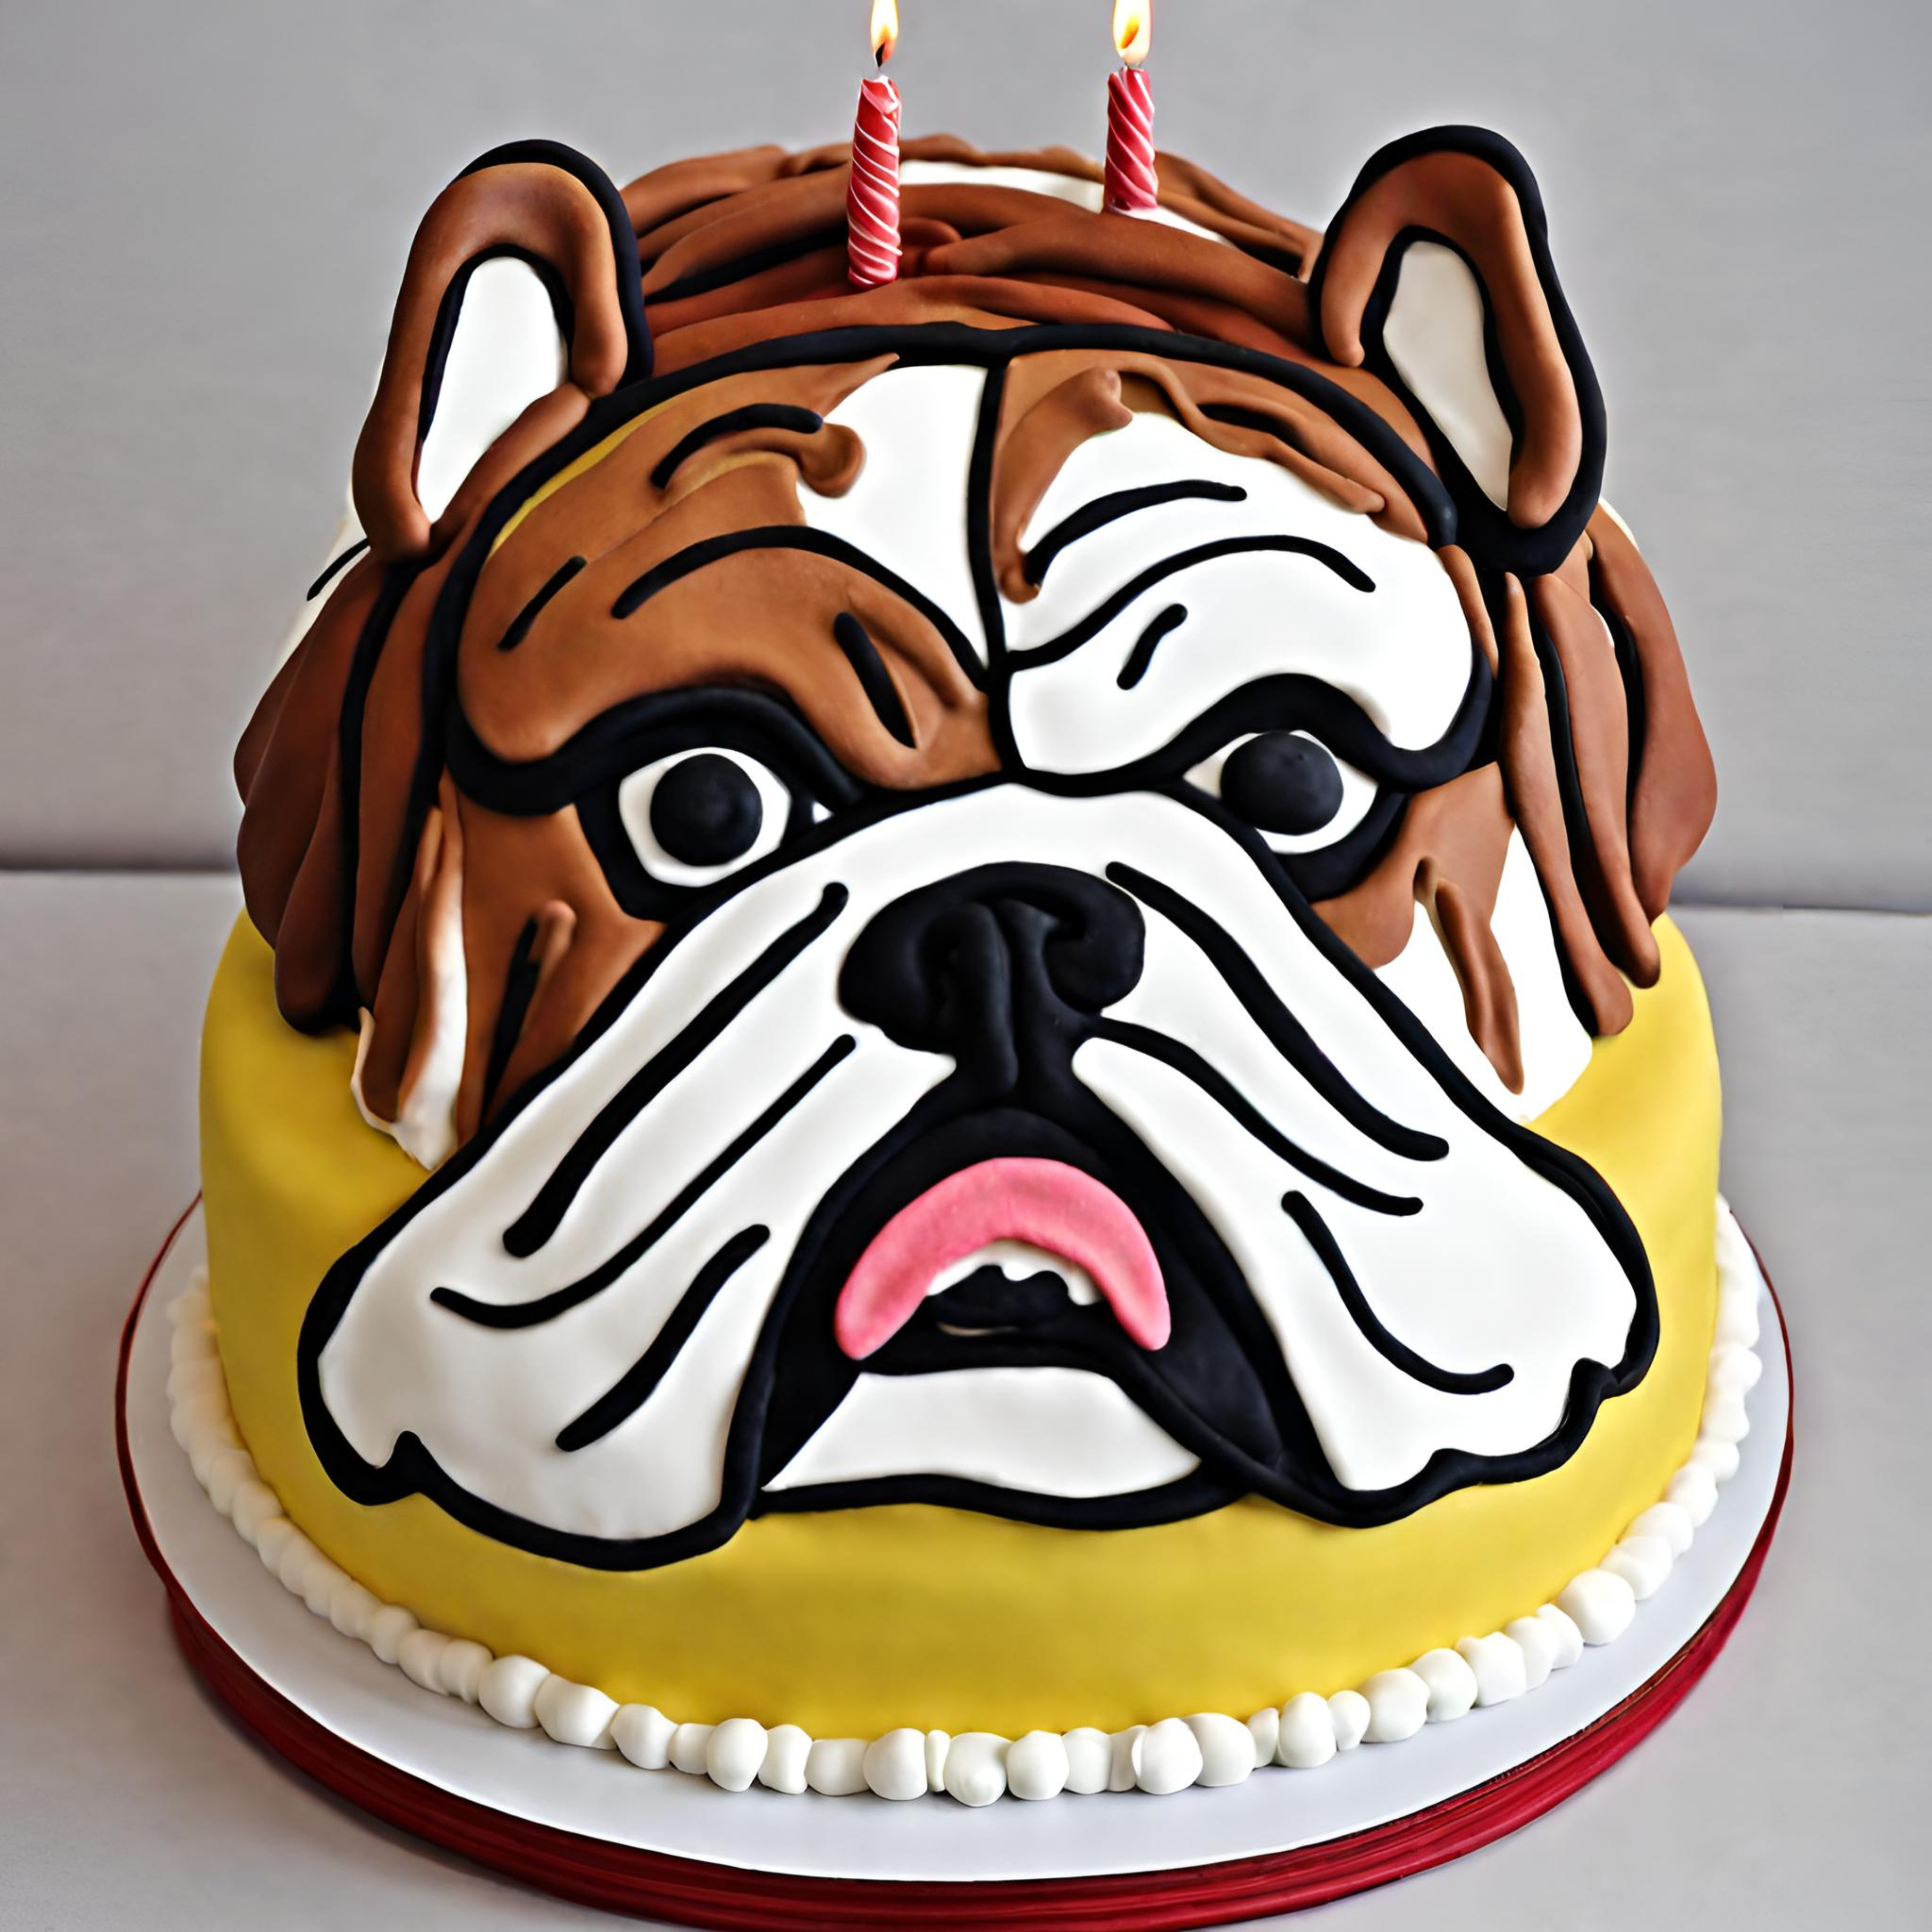 Celebrate Your Dog's Birthday with a Homemade Cake Recipe